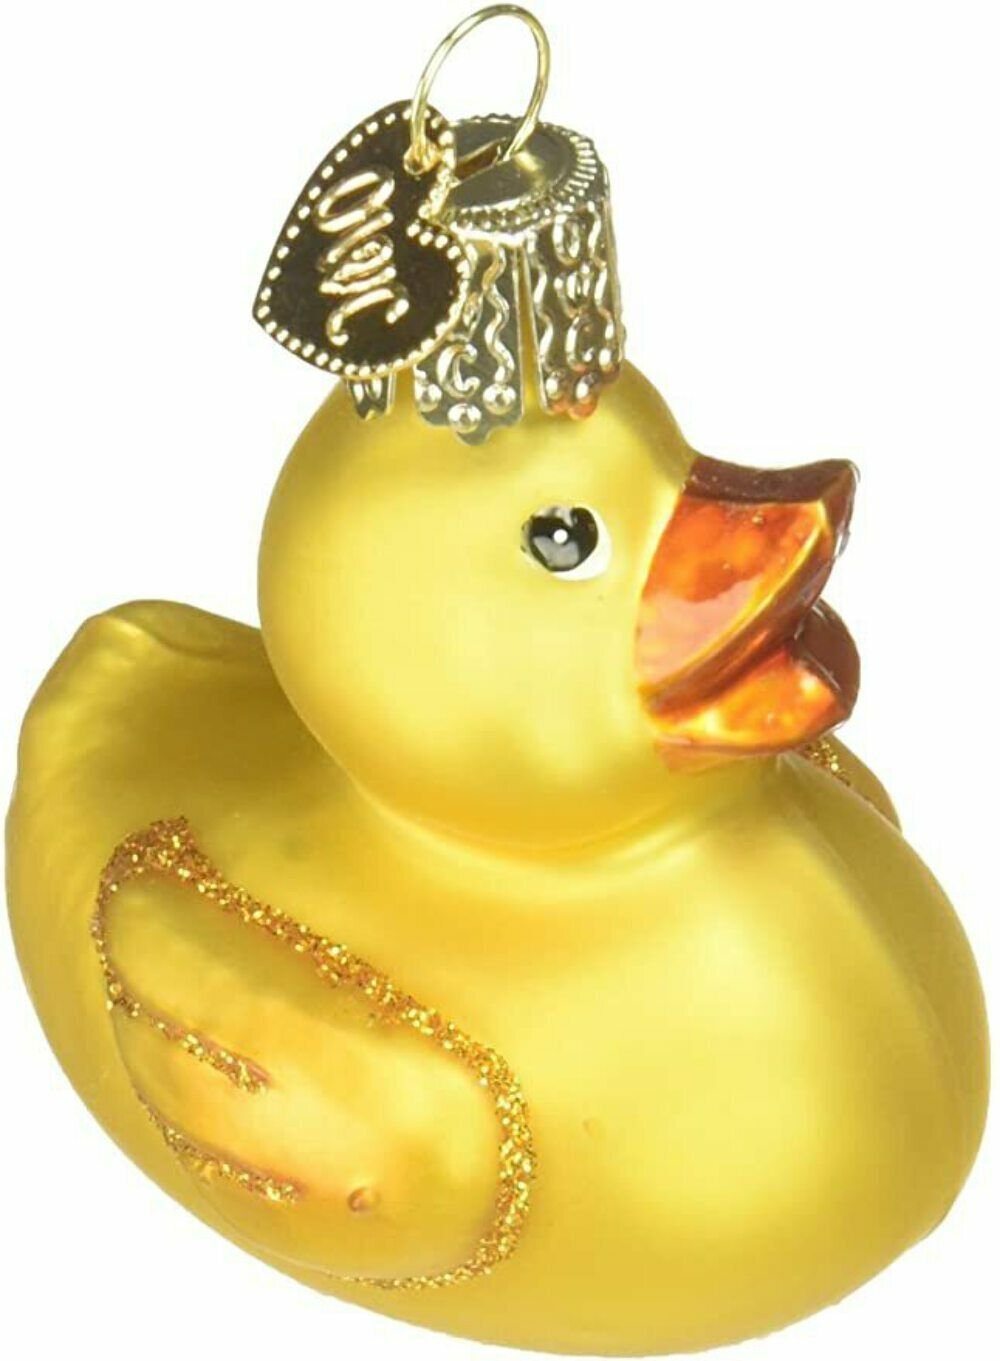 Rubber Ducky Ornament by Old World Christmas